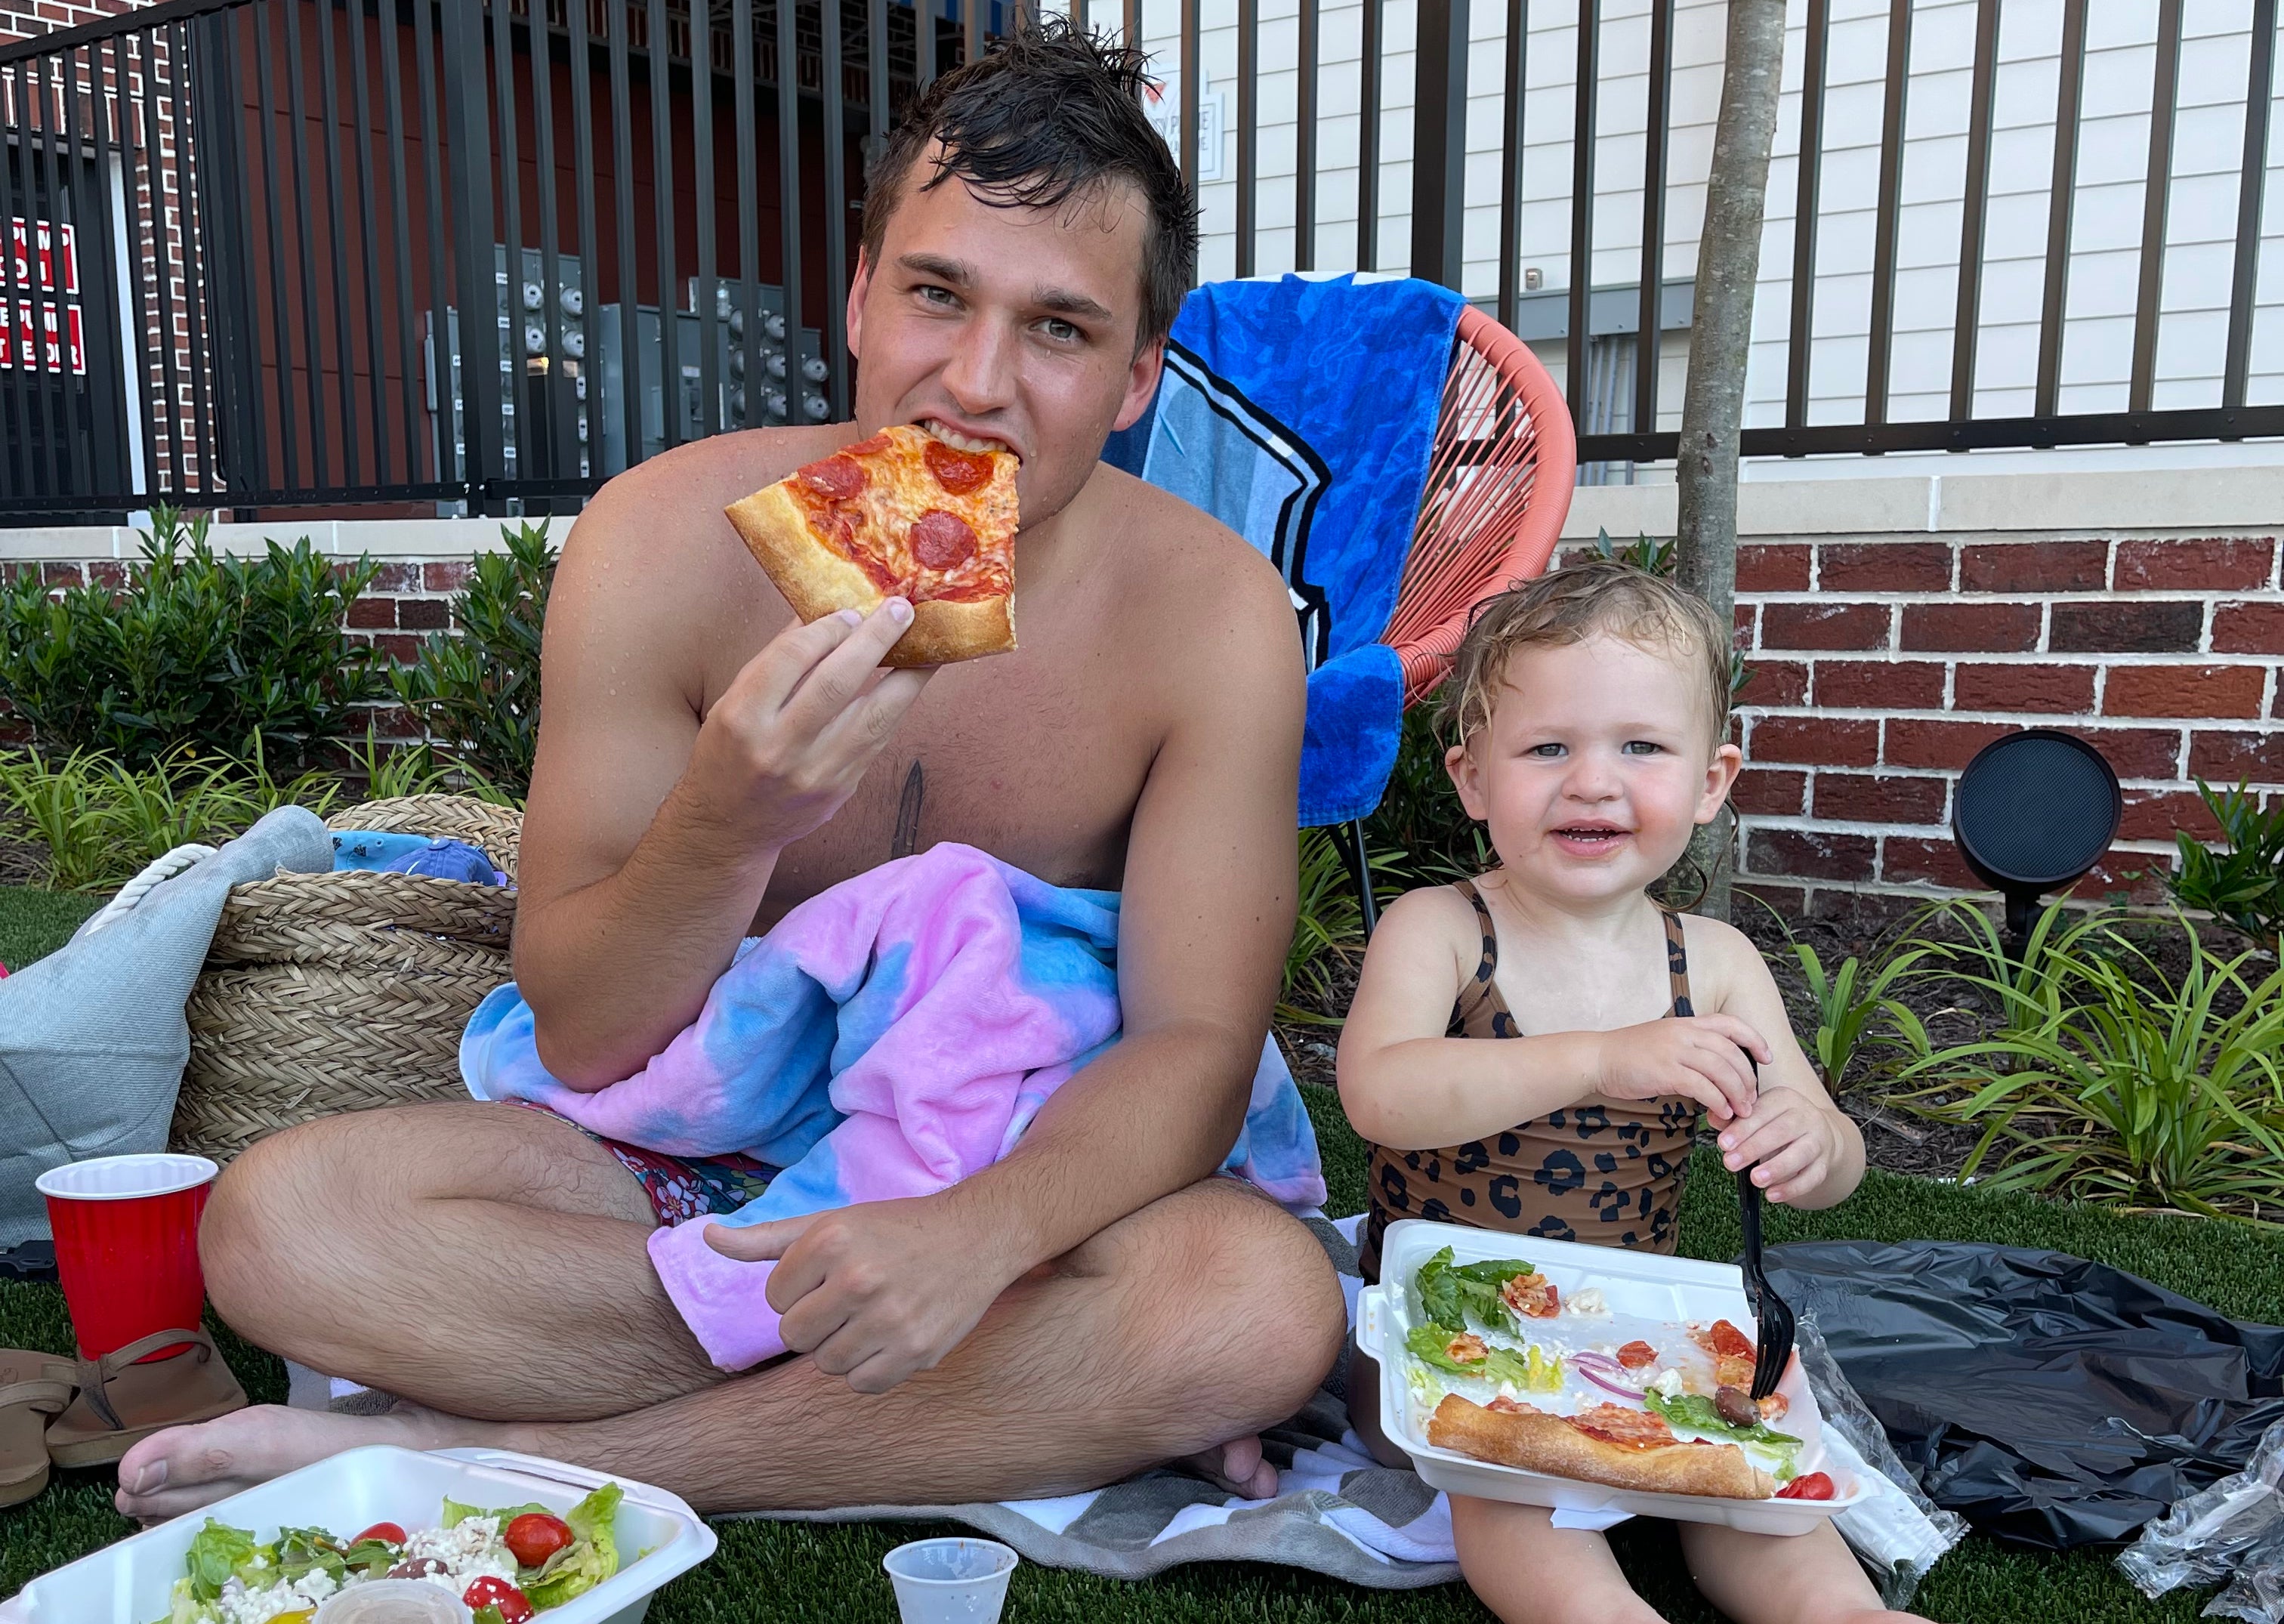 Man and young child eating pizza together